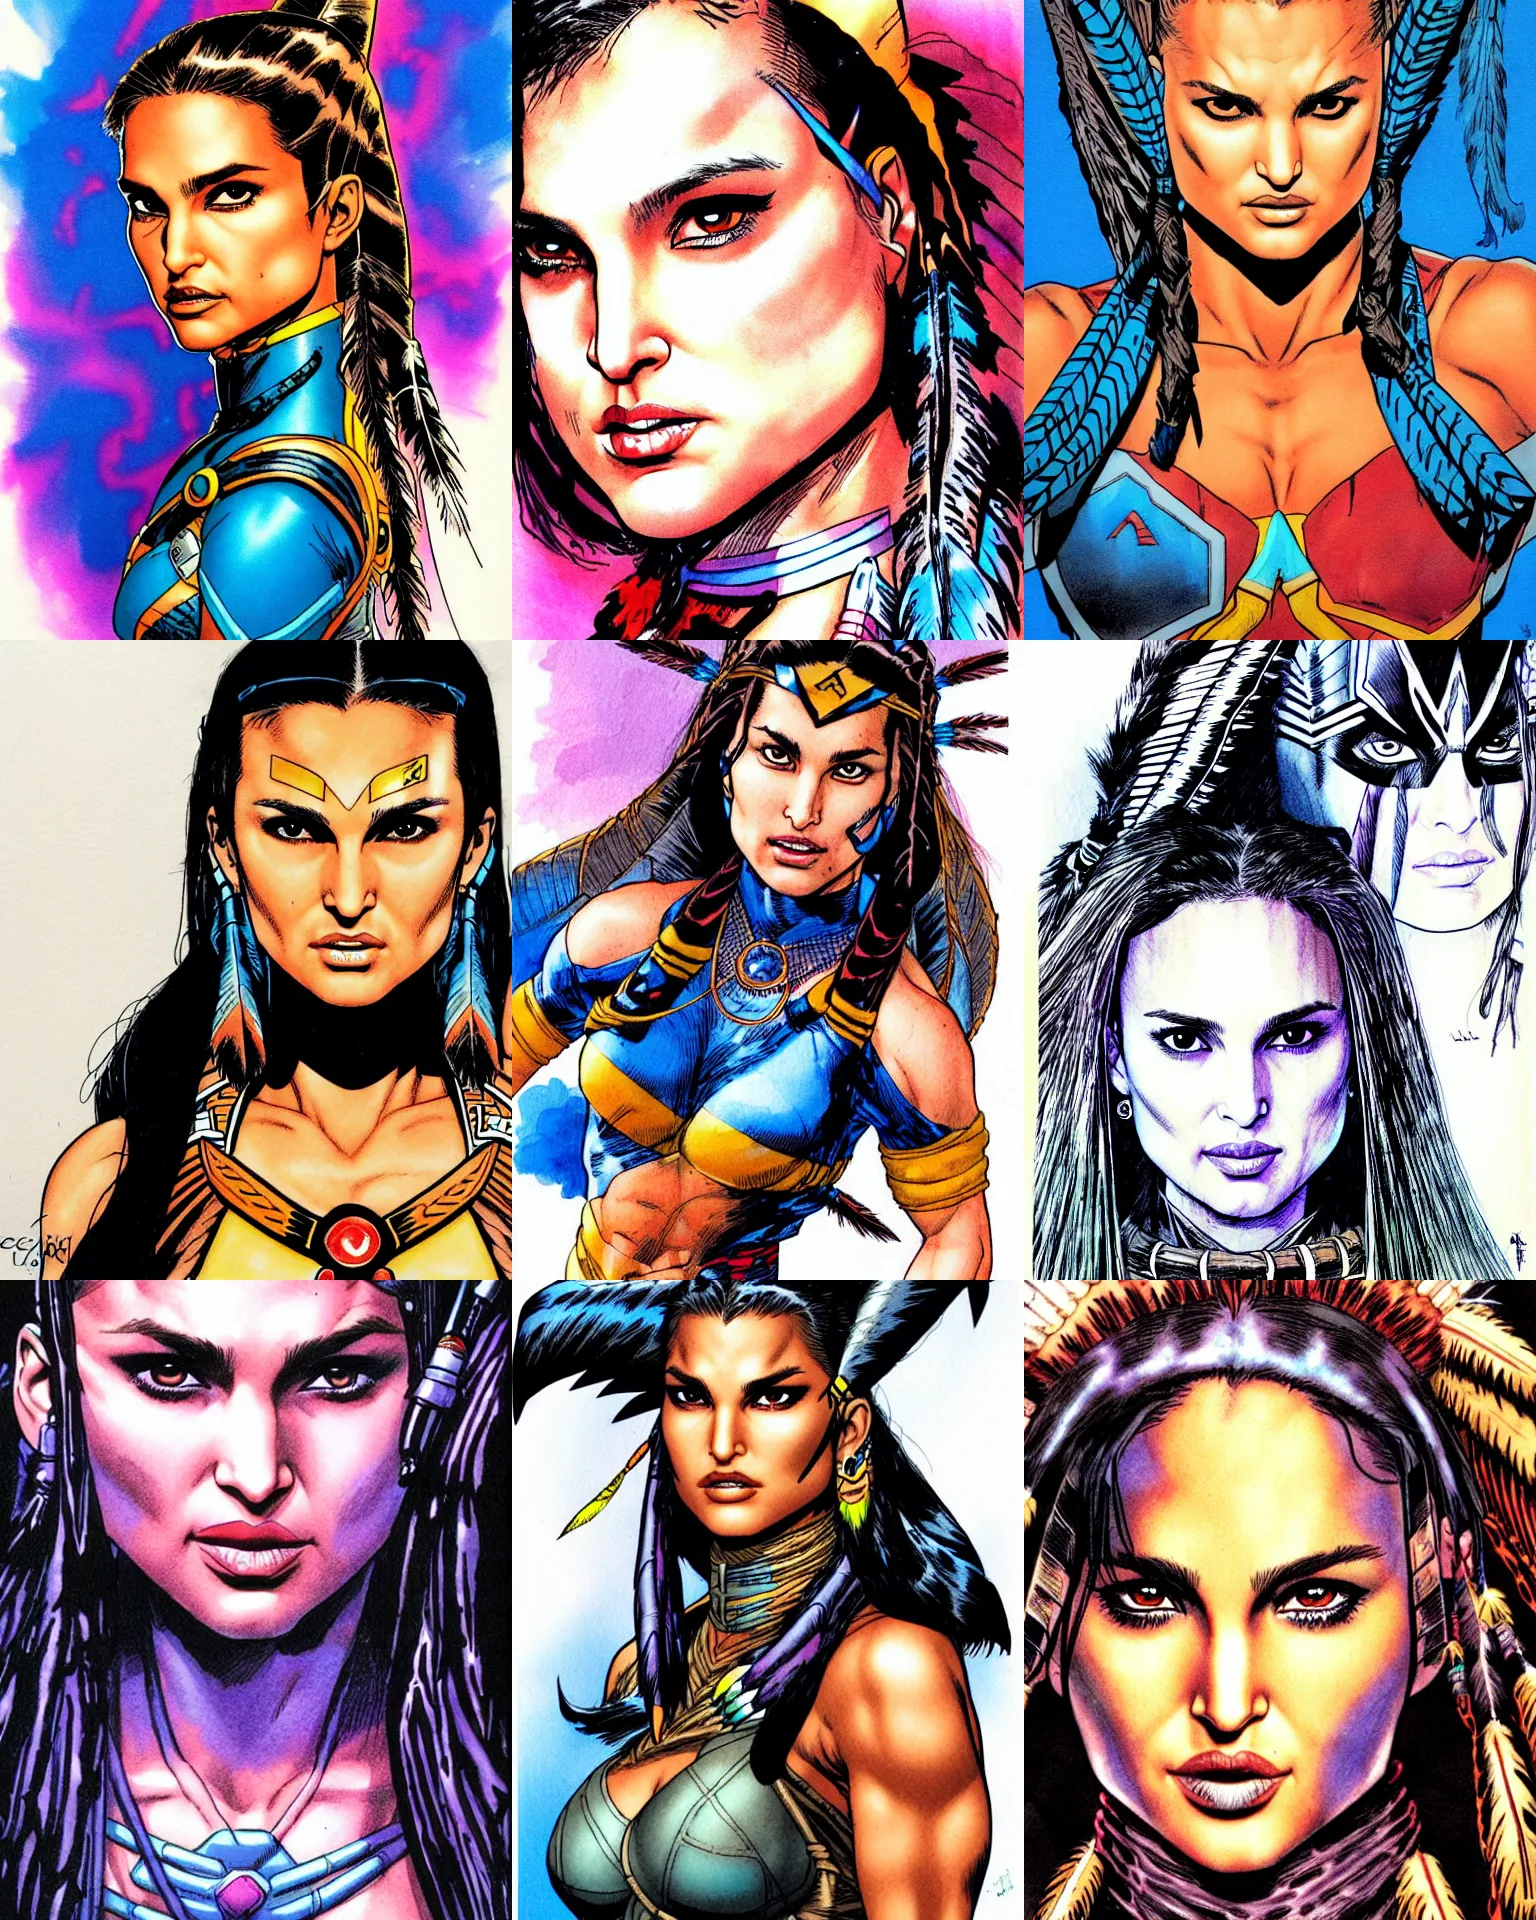 Prompt: jim lee!!! ink colorised airbrushed gouache sketch by jim lee close up headshot of native indian natalie portman in the style of jim lee, x - men superhero comic book character by jim lee